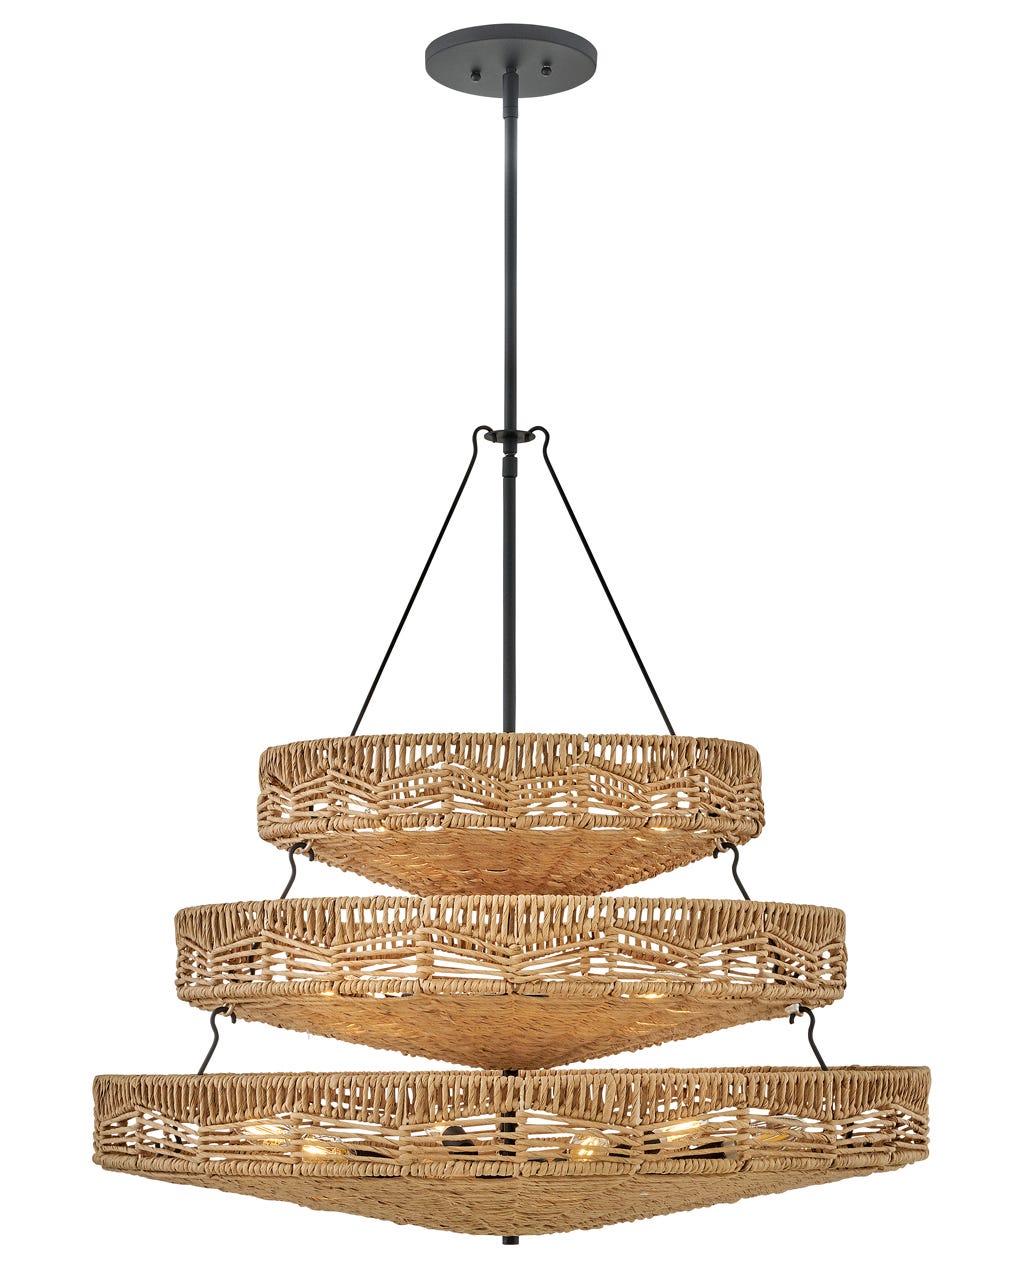 Hinkley Ophelia Chandelier Chandeliers Hinkley Black with Natural Shade 30.0x30.0x32.25 